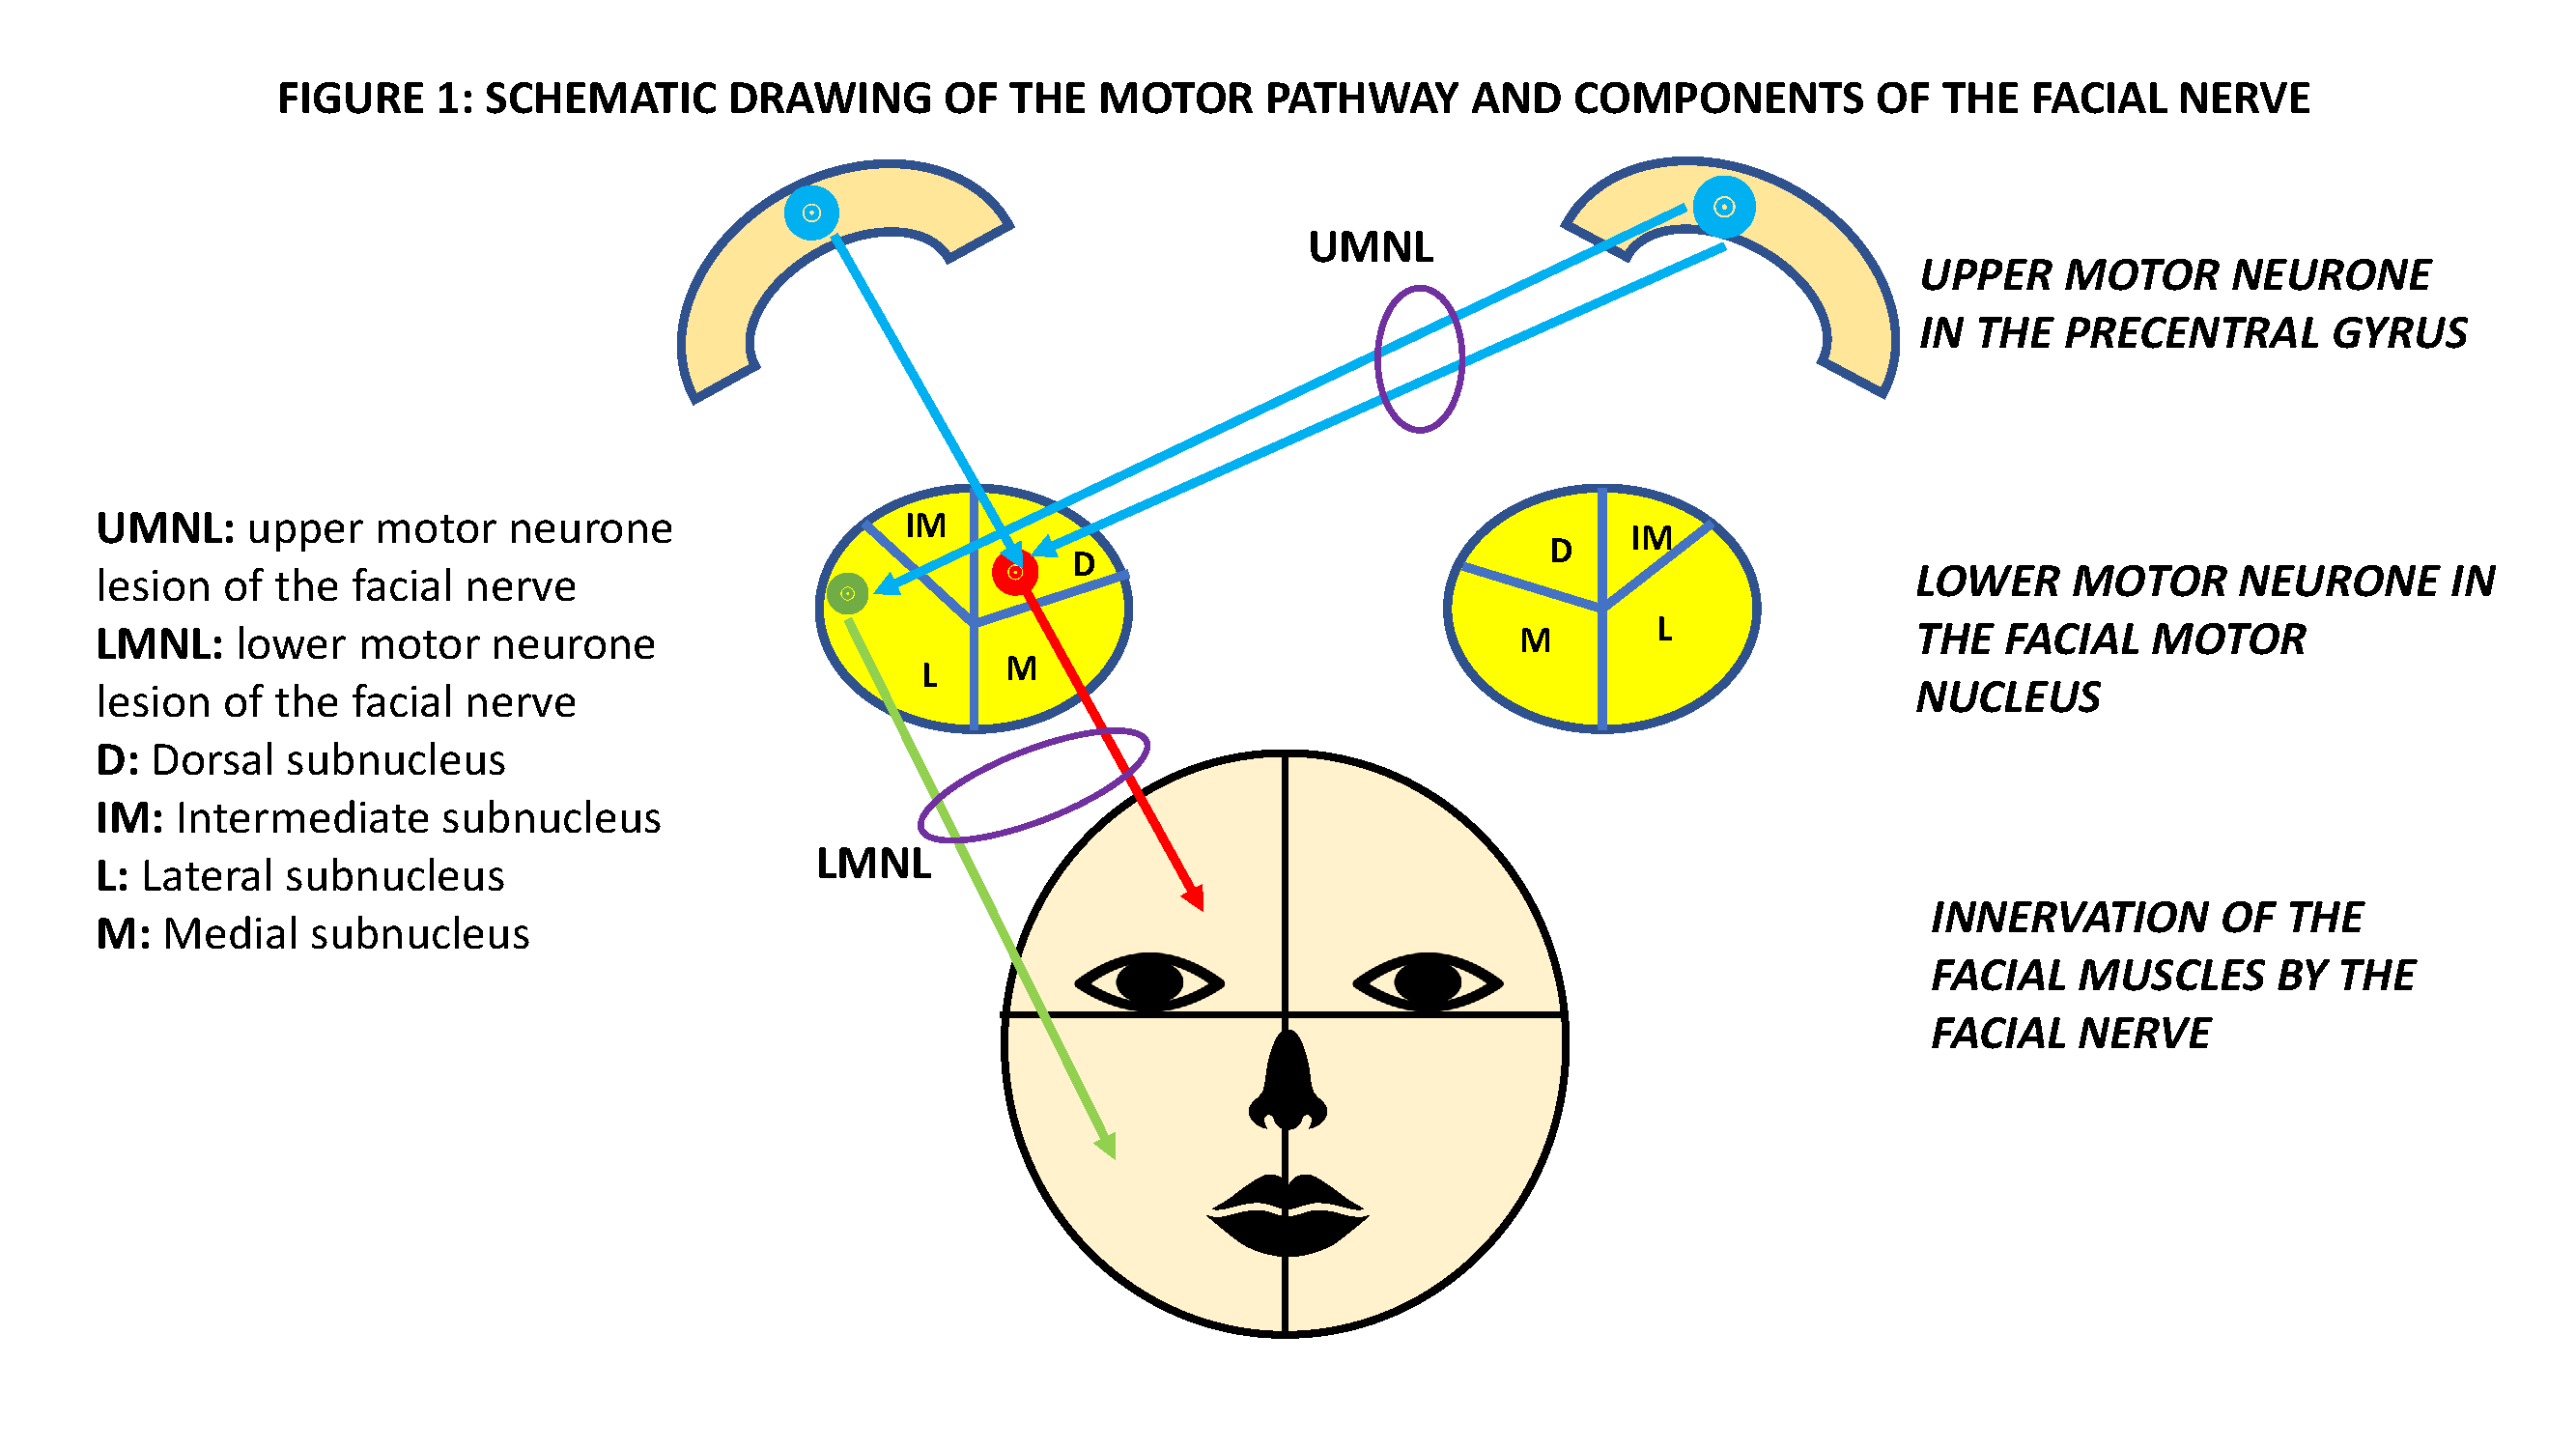 Schematic drawing of the motor pathway and components of the facial nerve